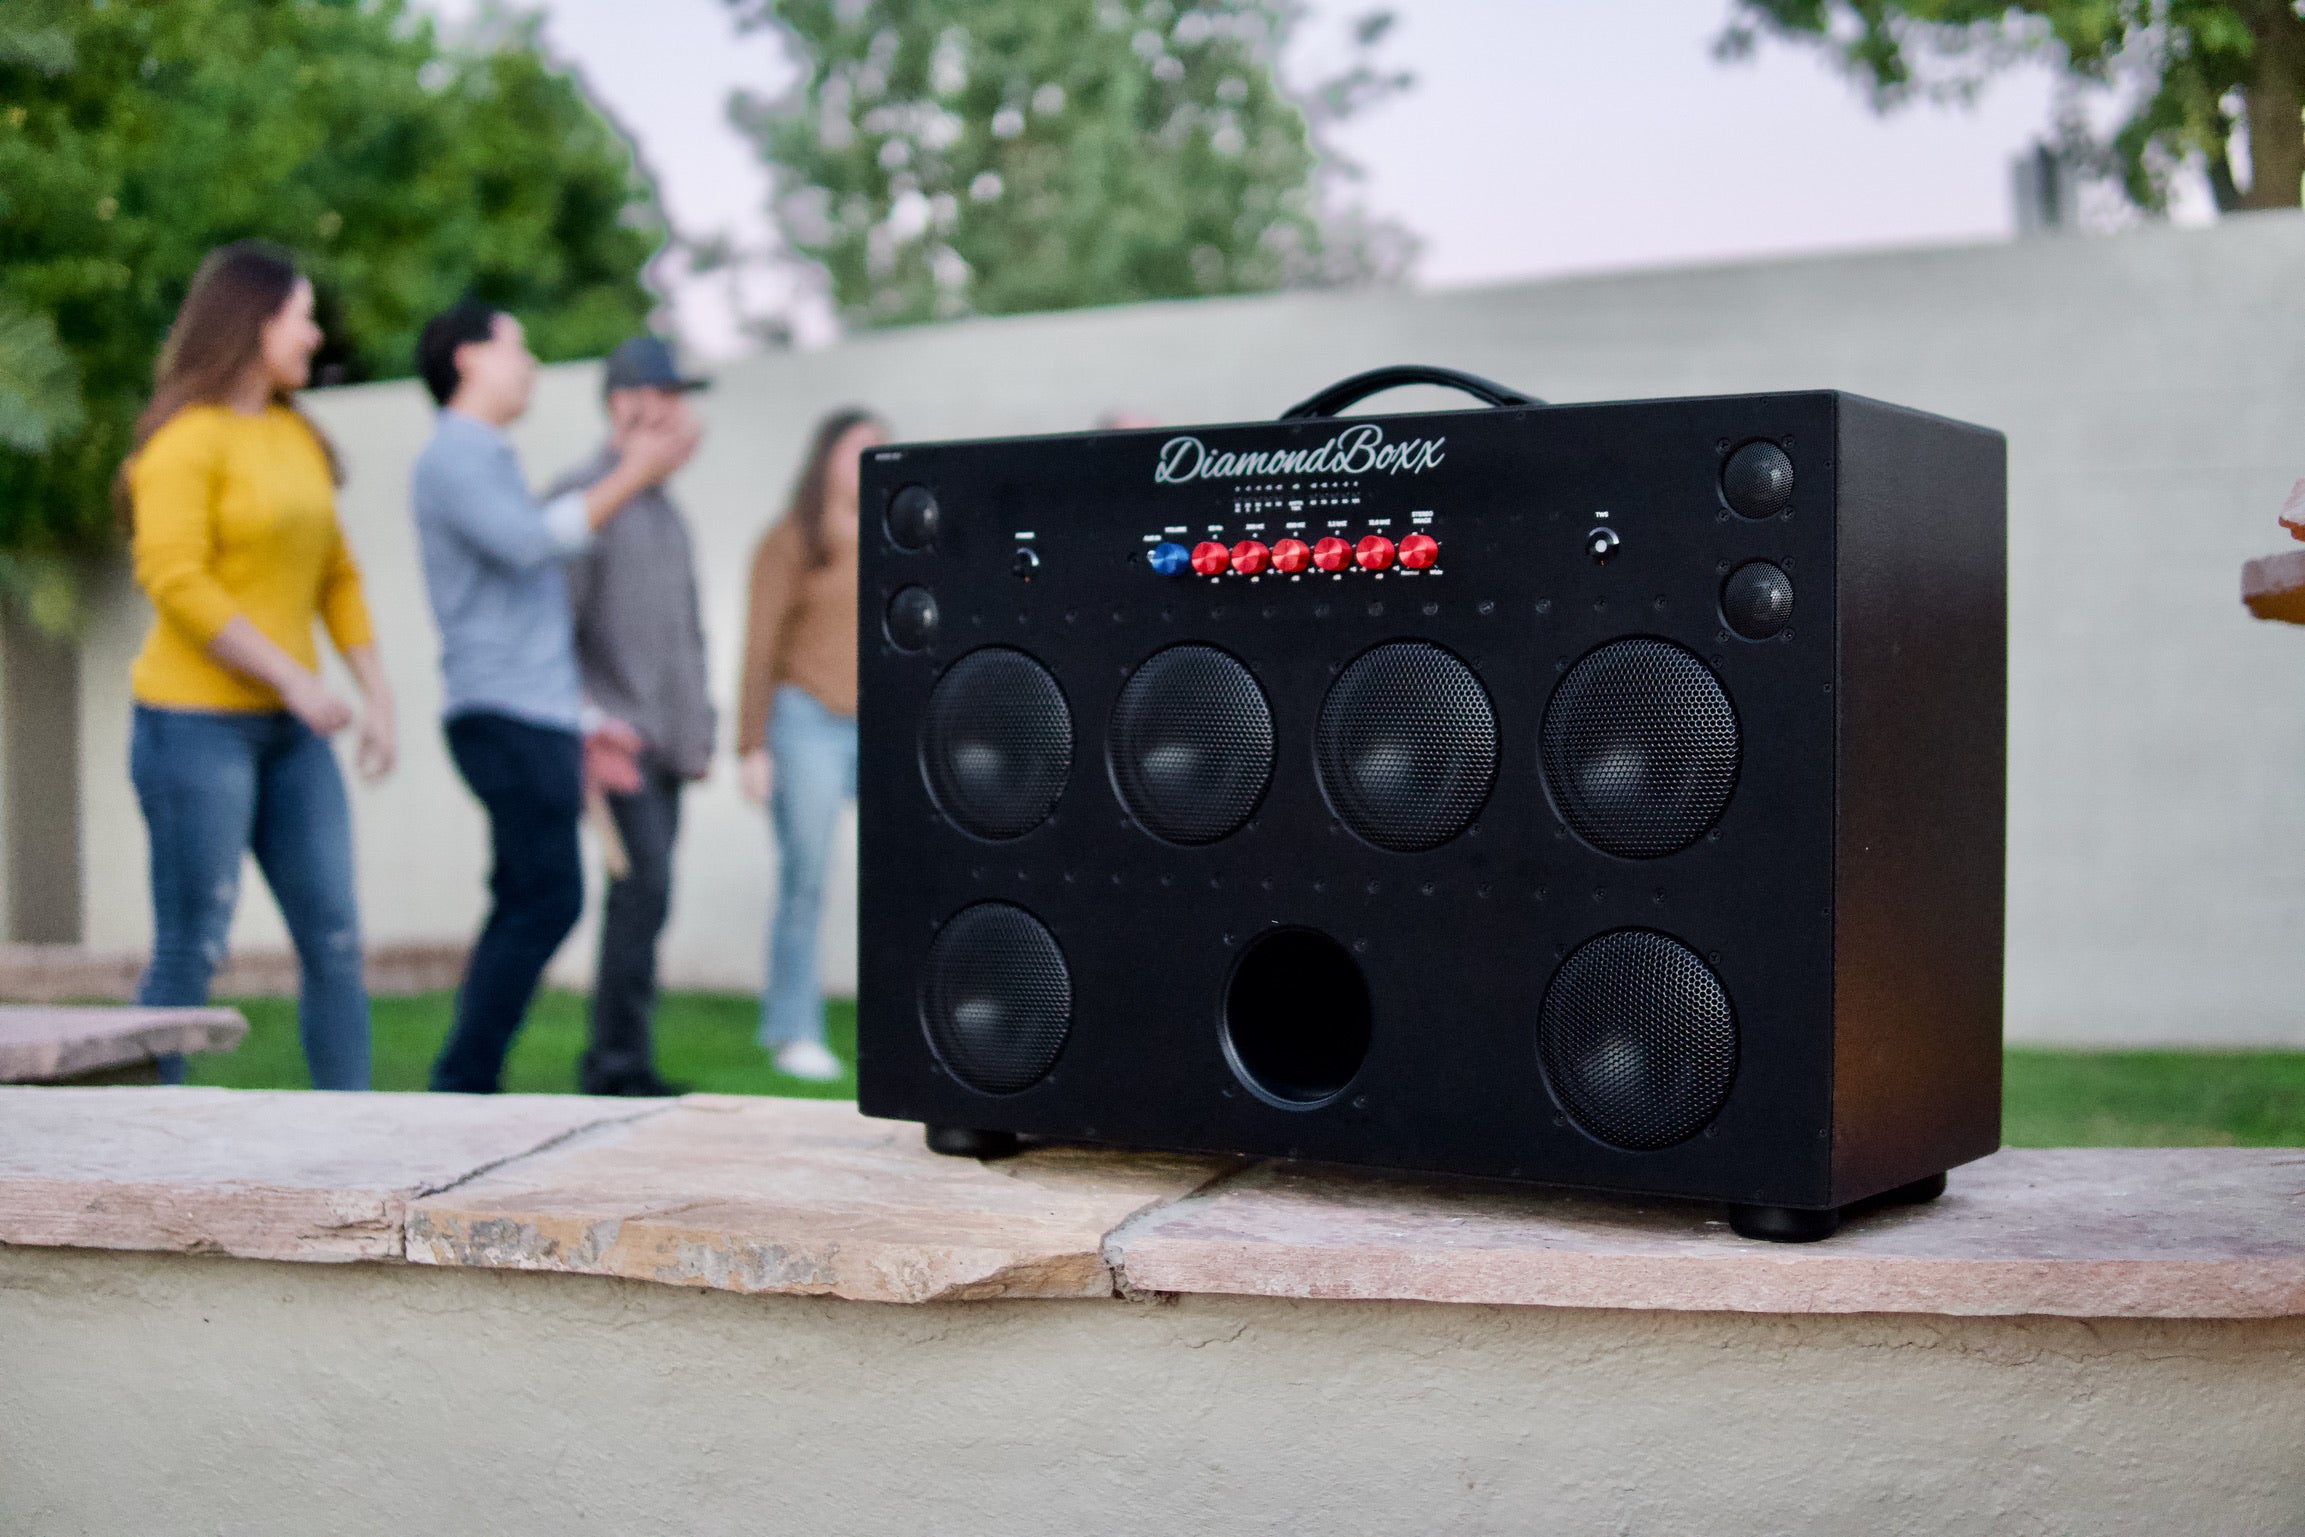 angled front view of black XL3 speaker with red and blue knobs in outdoor setting with people in background